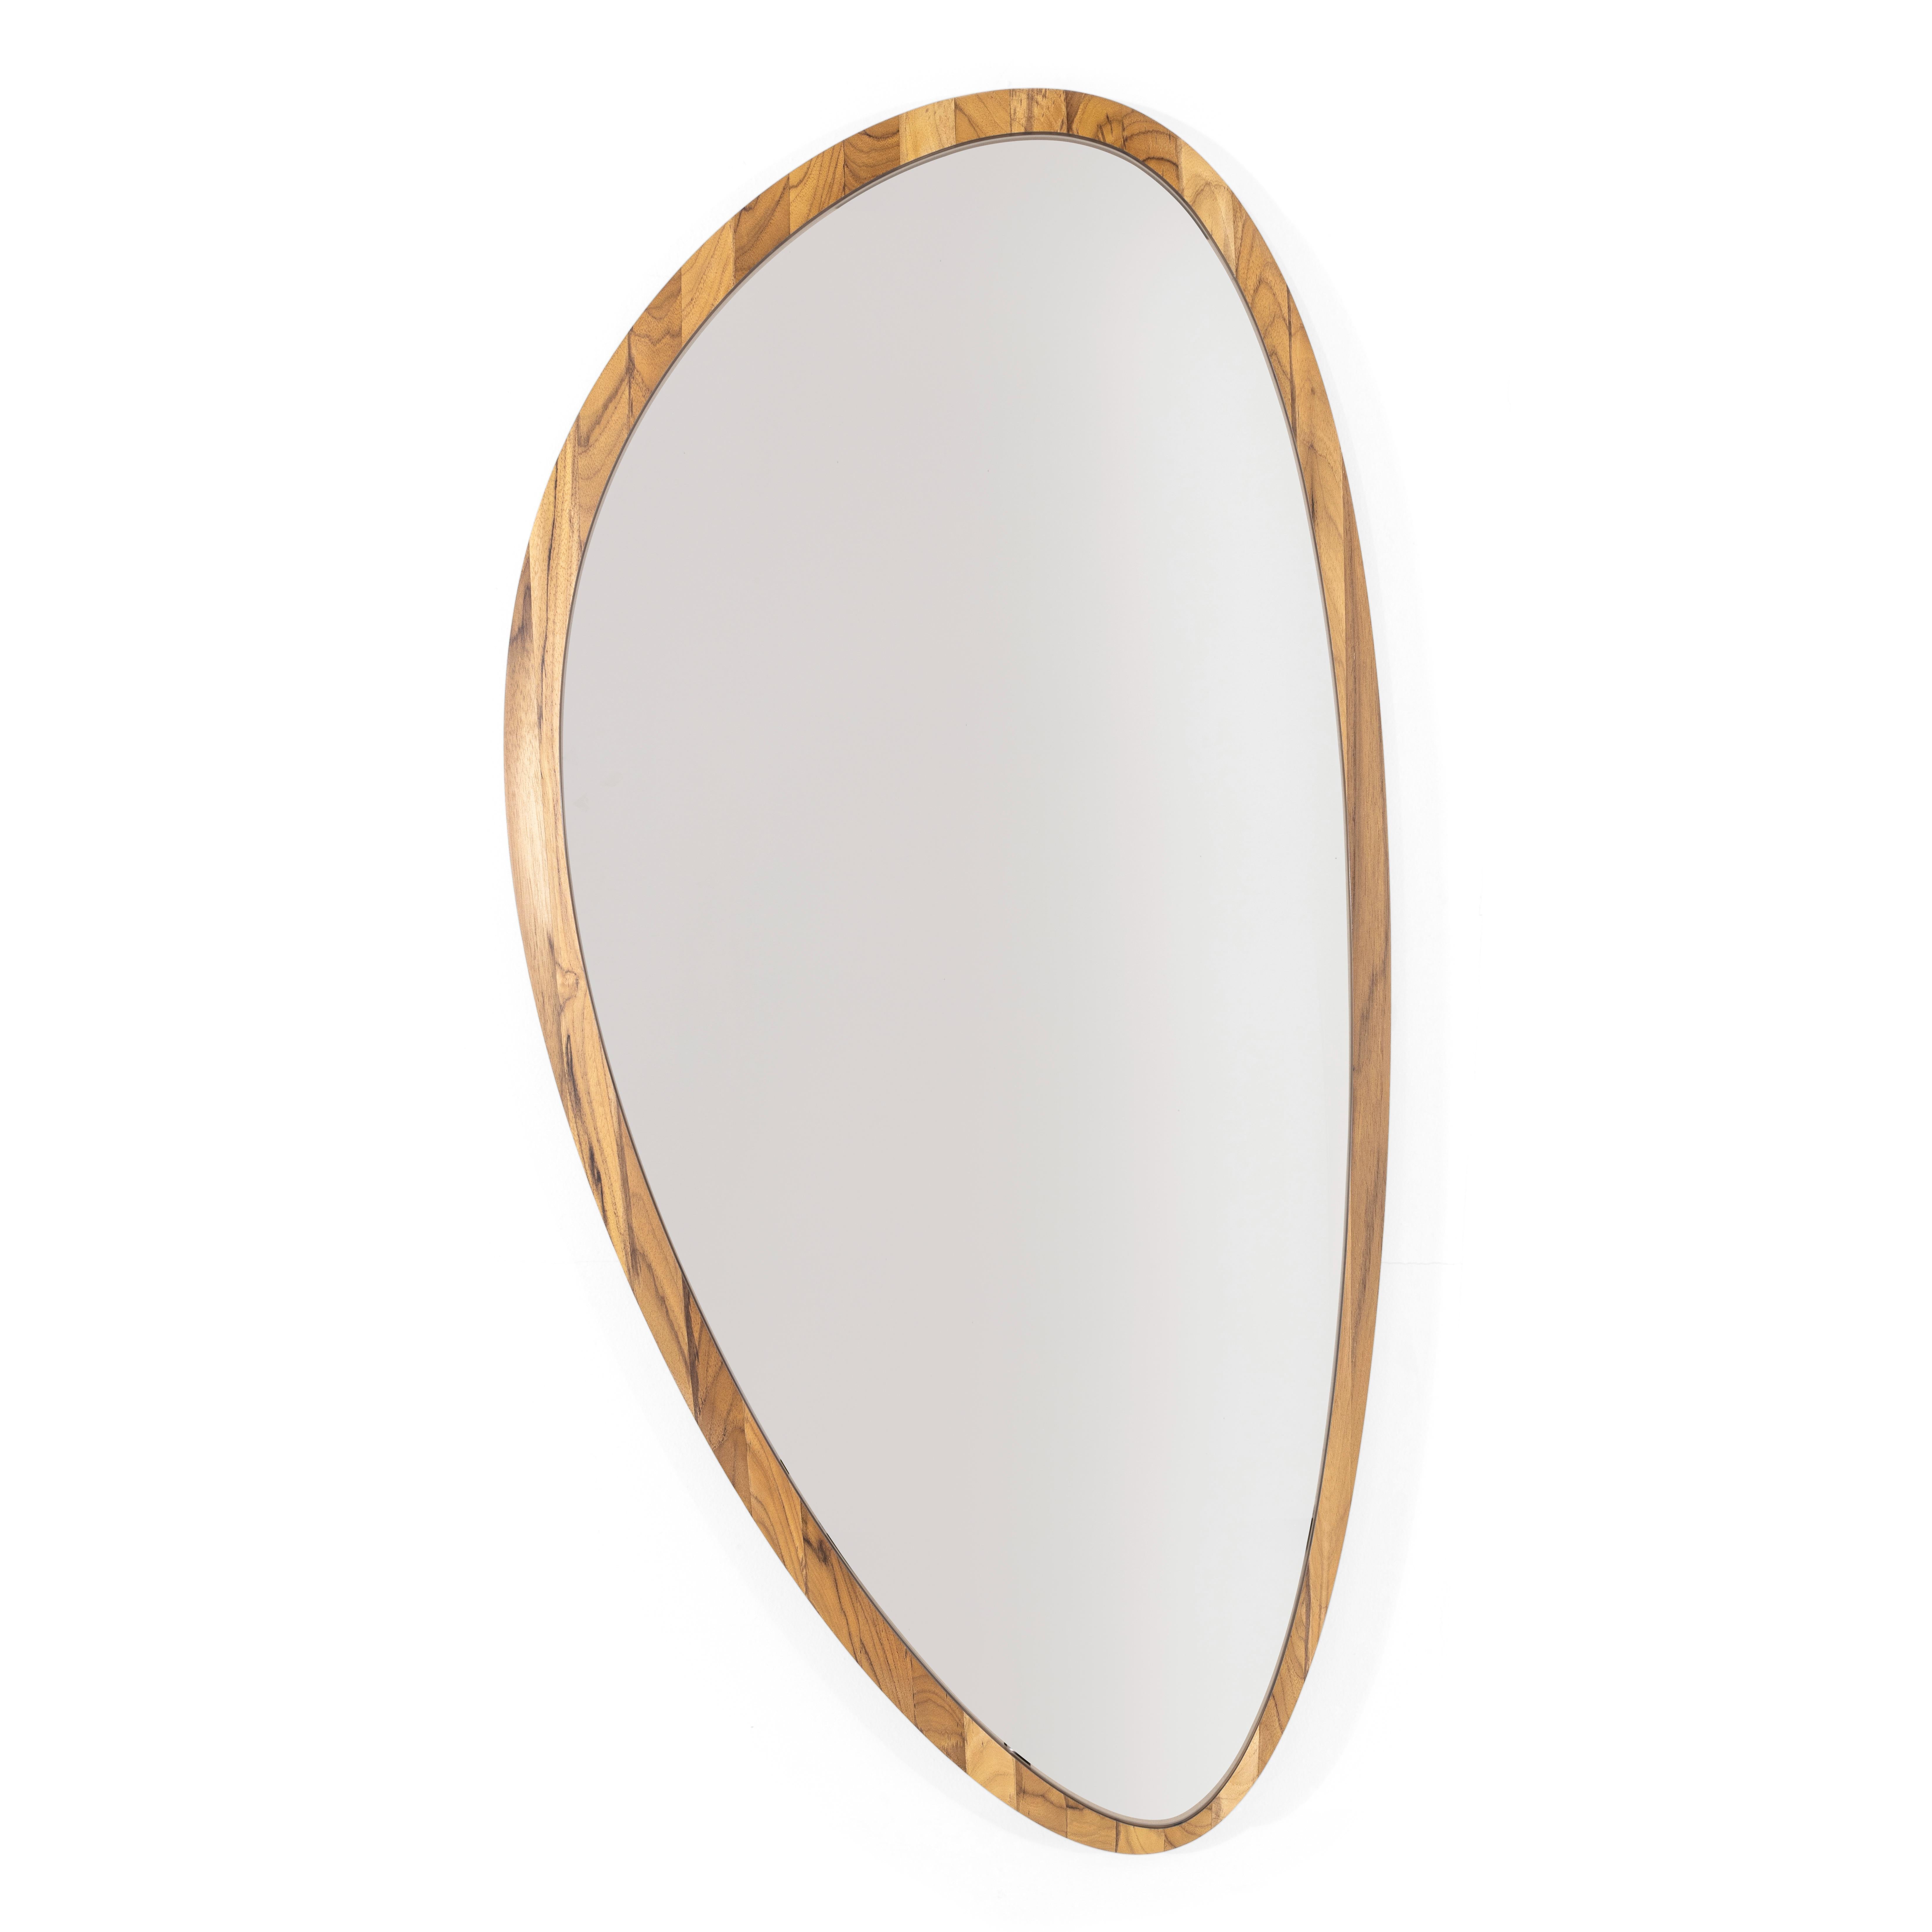 Contemporary Pante Mirror in Teak Wood Finish, Set of 4 For Sale